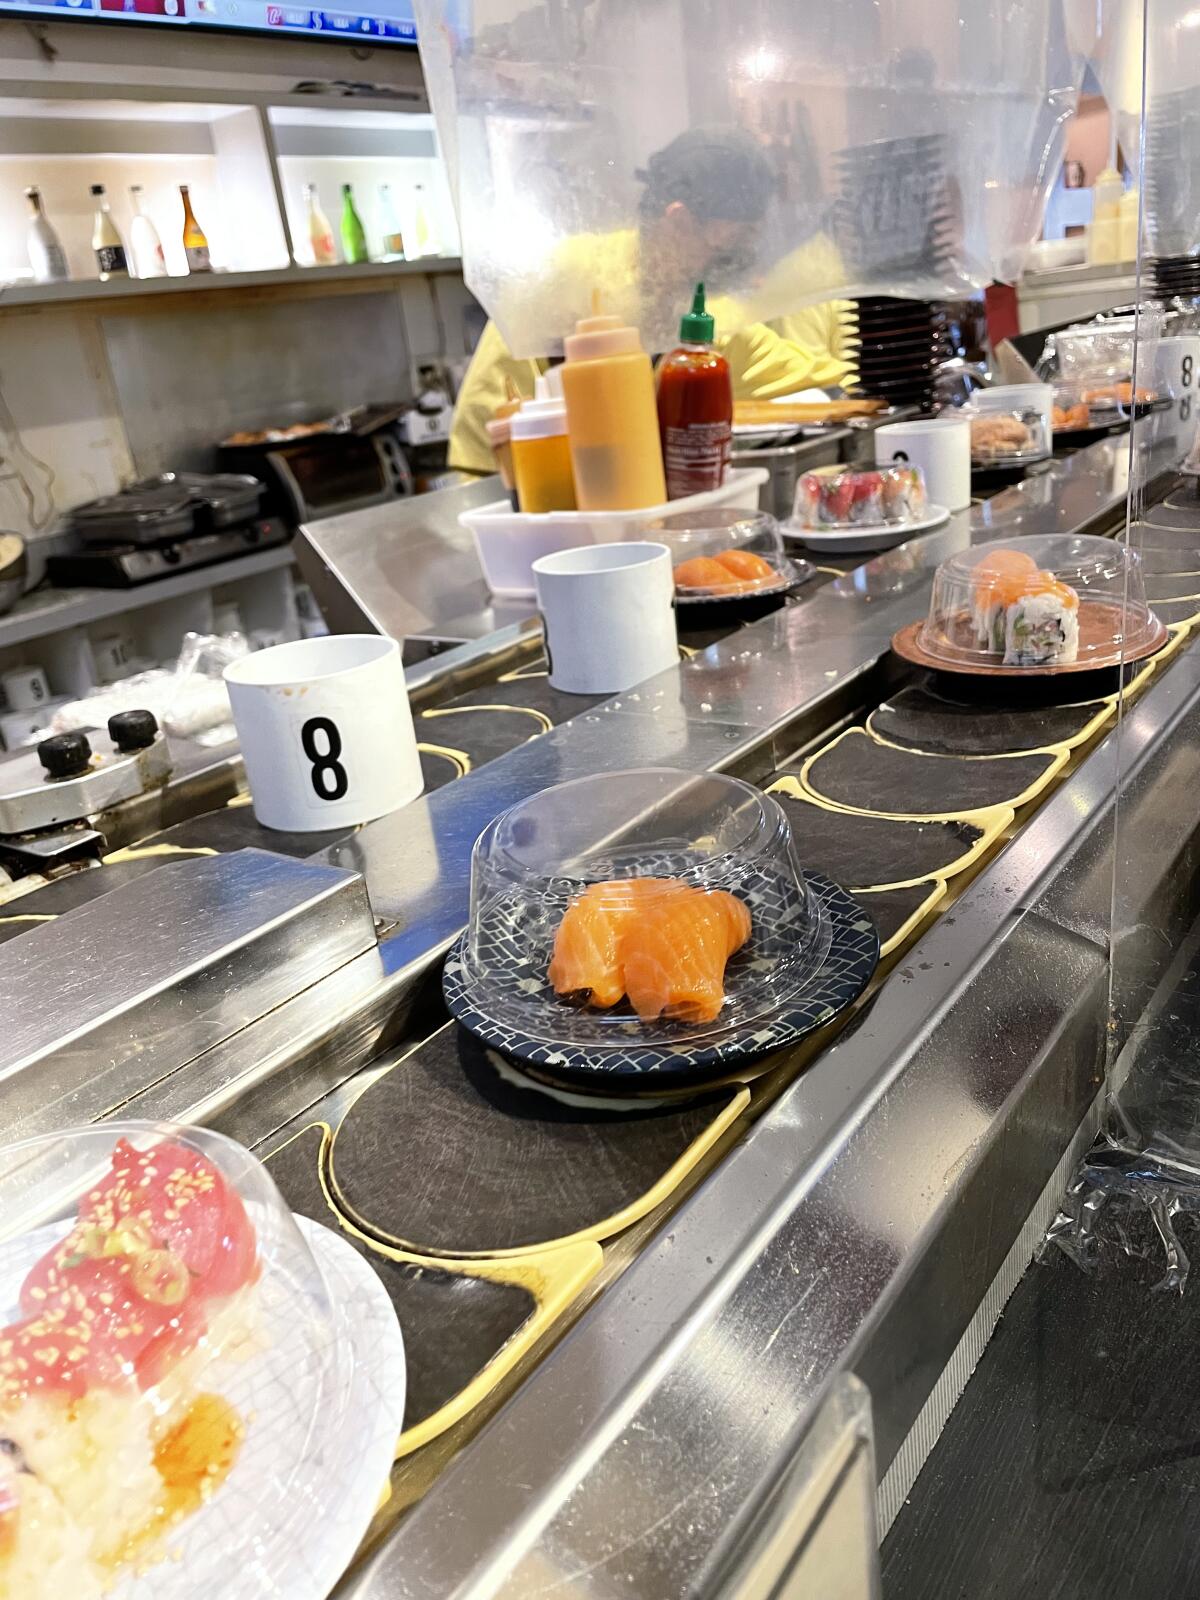 The conveyor belt delivers affordable sushi options at Kaisen in Santa Ana.